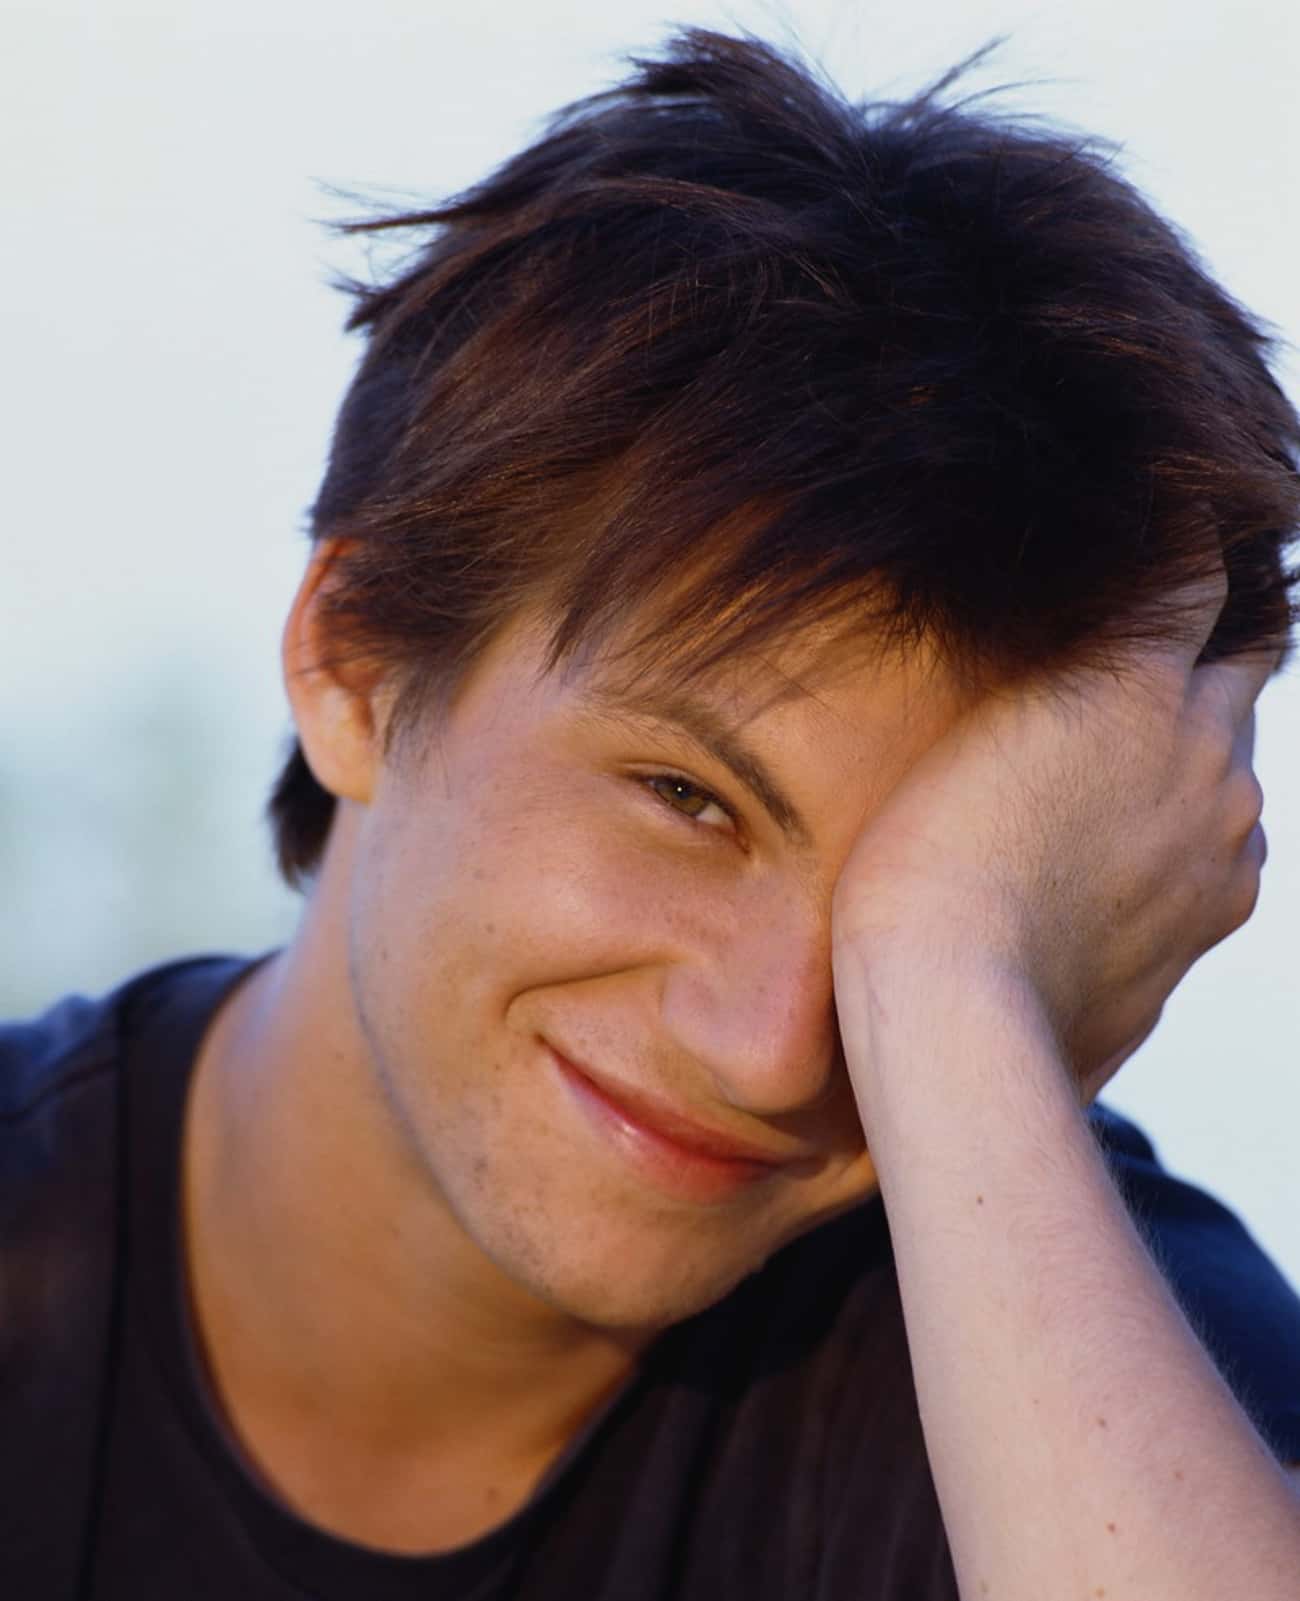 Young Christian Slater in Black T-Shirt Leaning on Hand